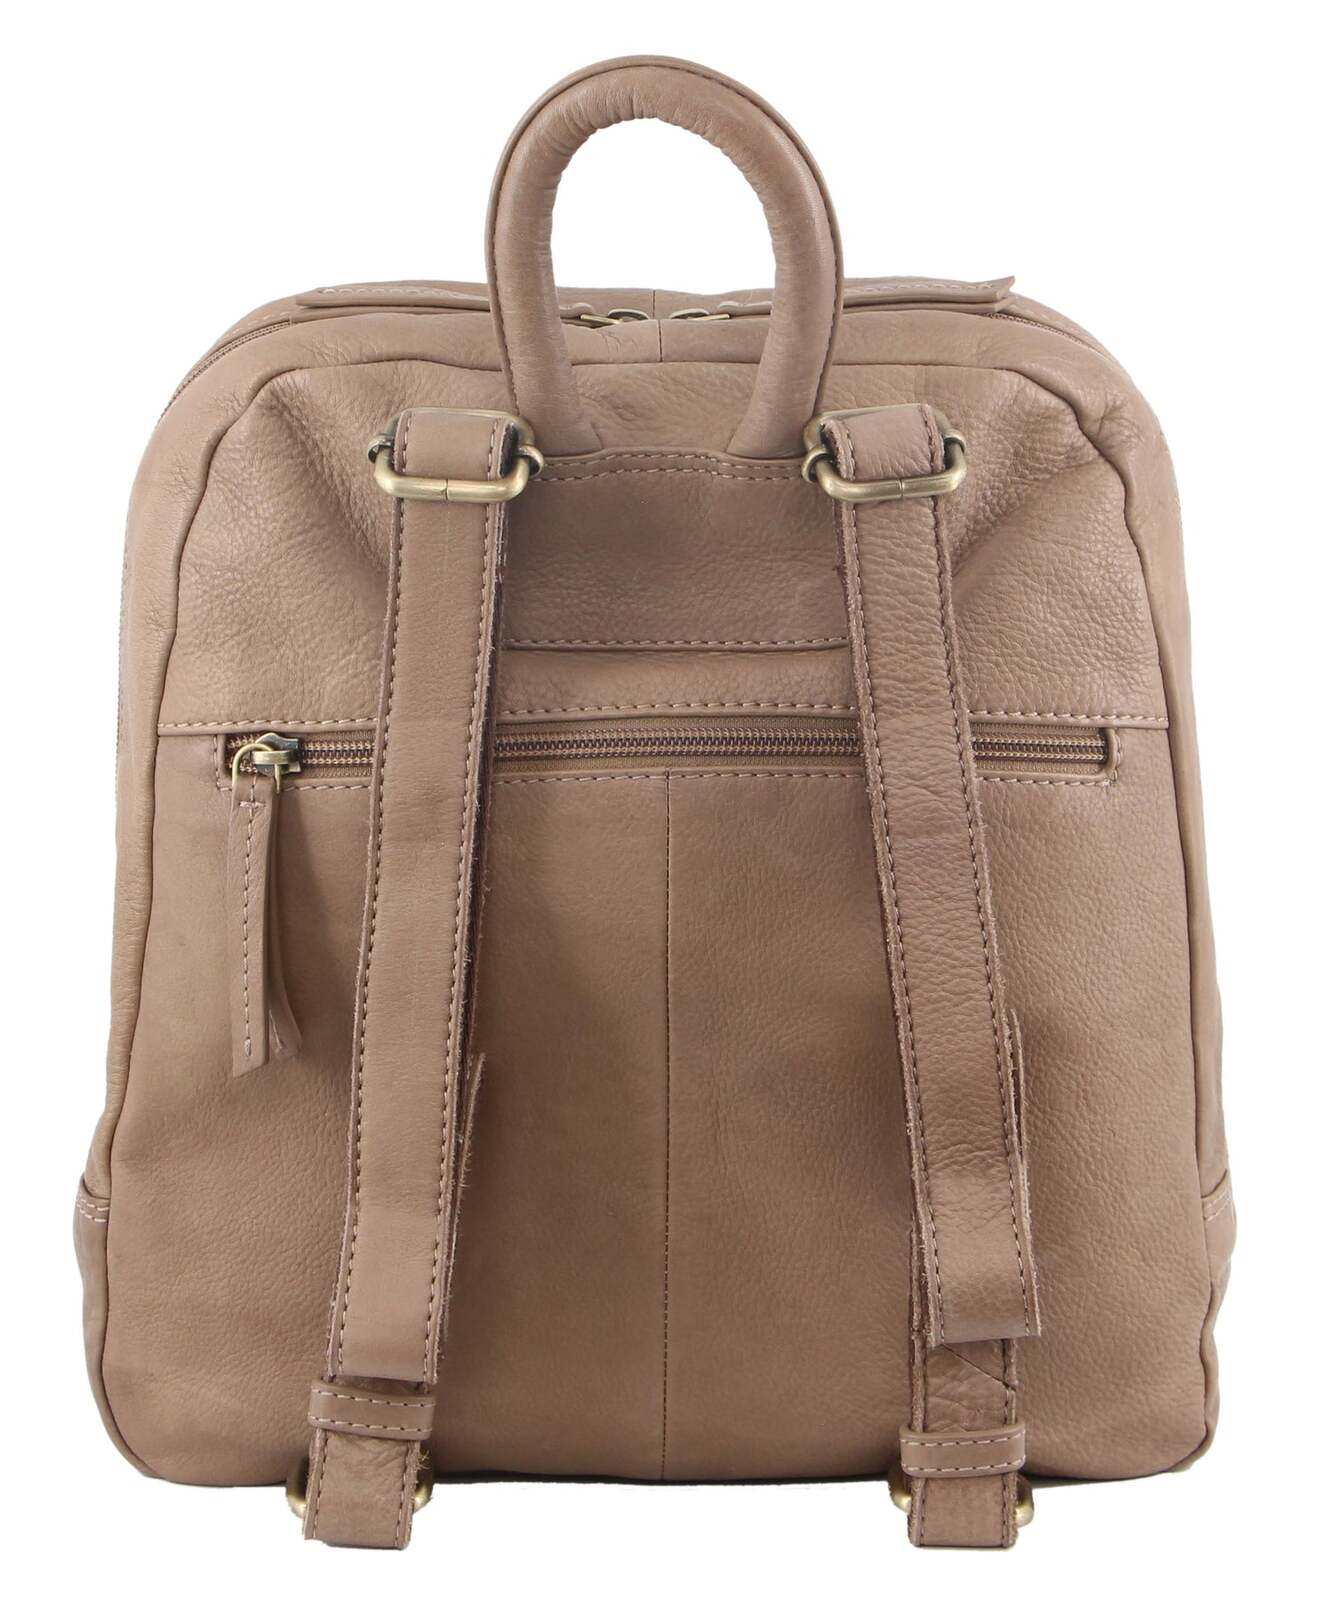 Womens Woven Leather Backpack Bag - Taupe